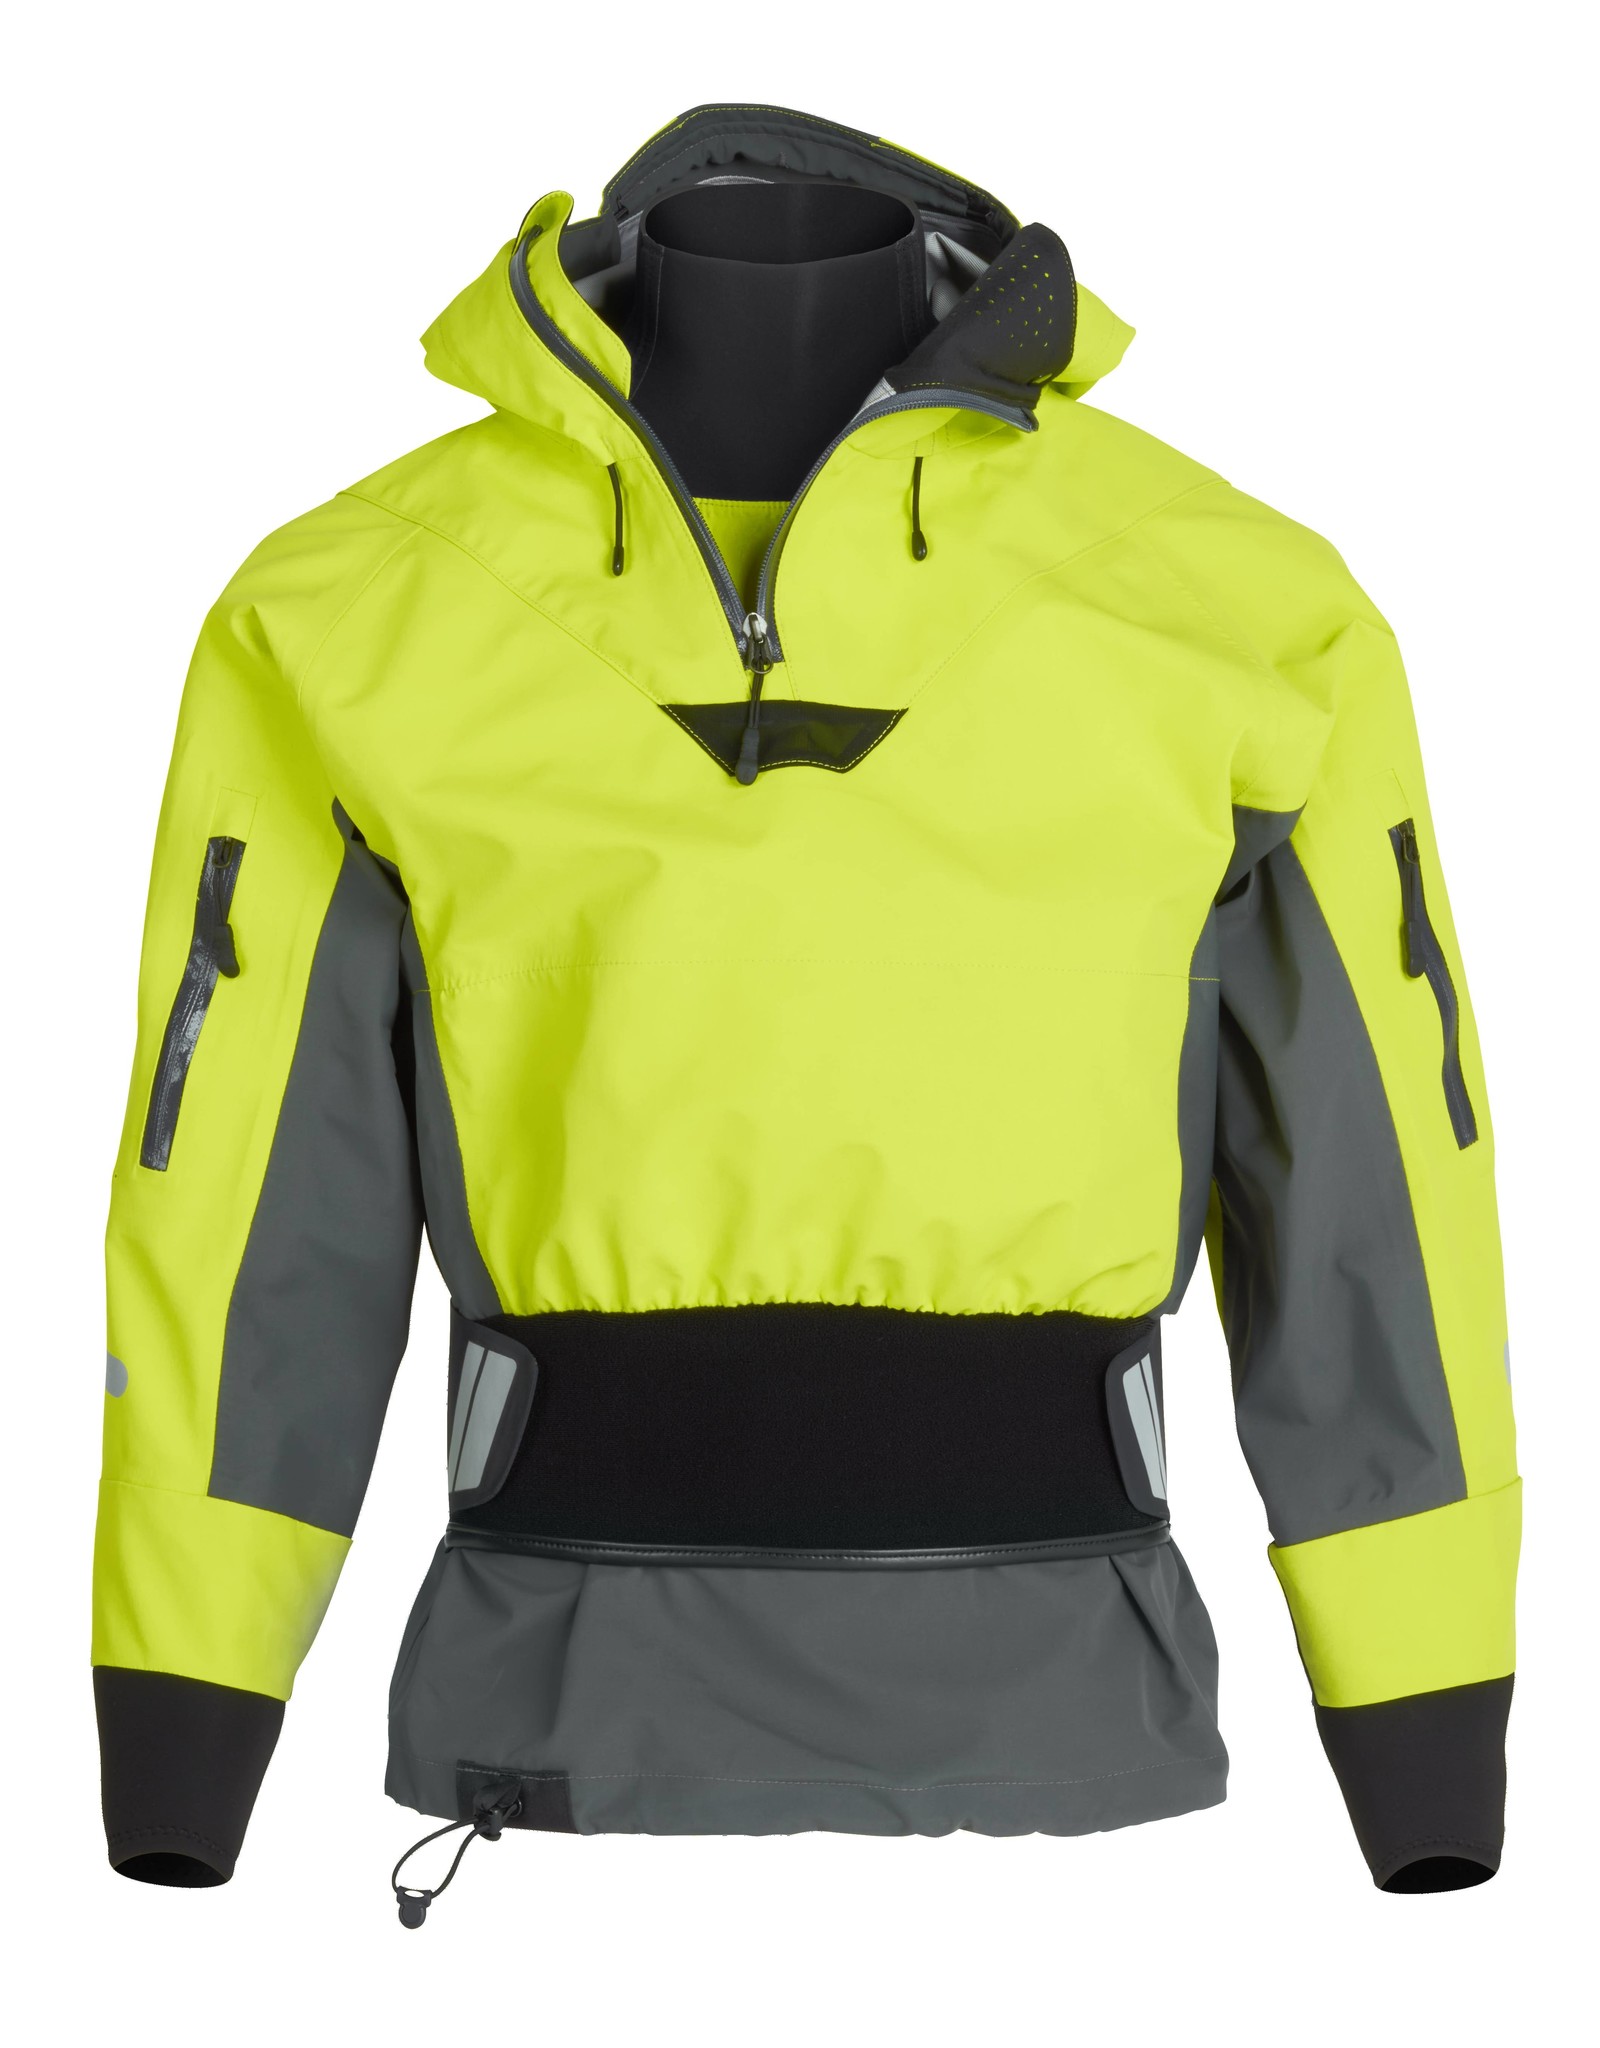 NRS NRS Anorak Orion Femme